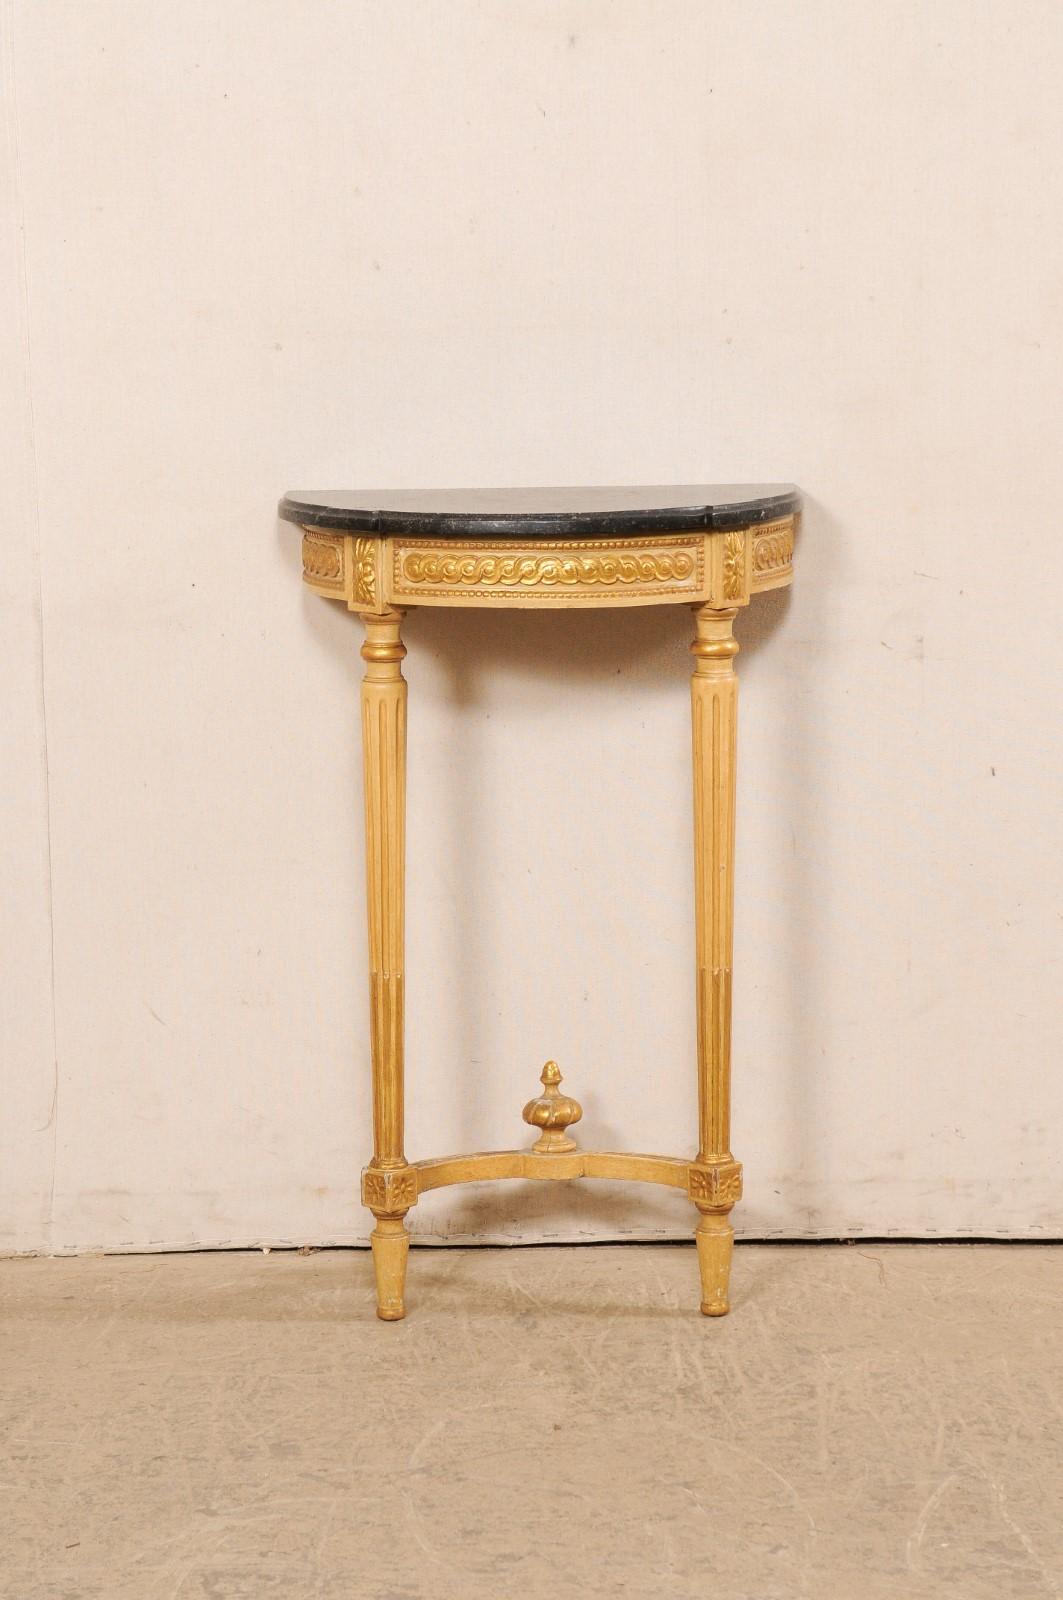 A French small-sized carved and gilt wood wall console, with marble top and finial accent, from the early 20th century. This table from France features a petite demi-shaped (half moon) marble top with squared step-out style corners flanking its